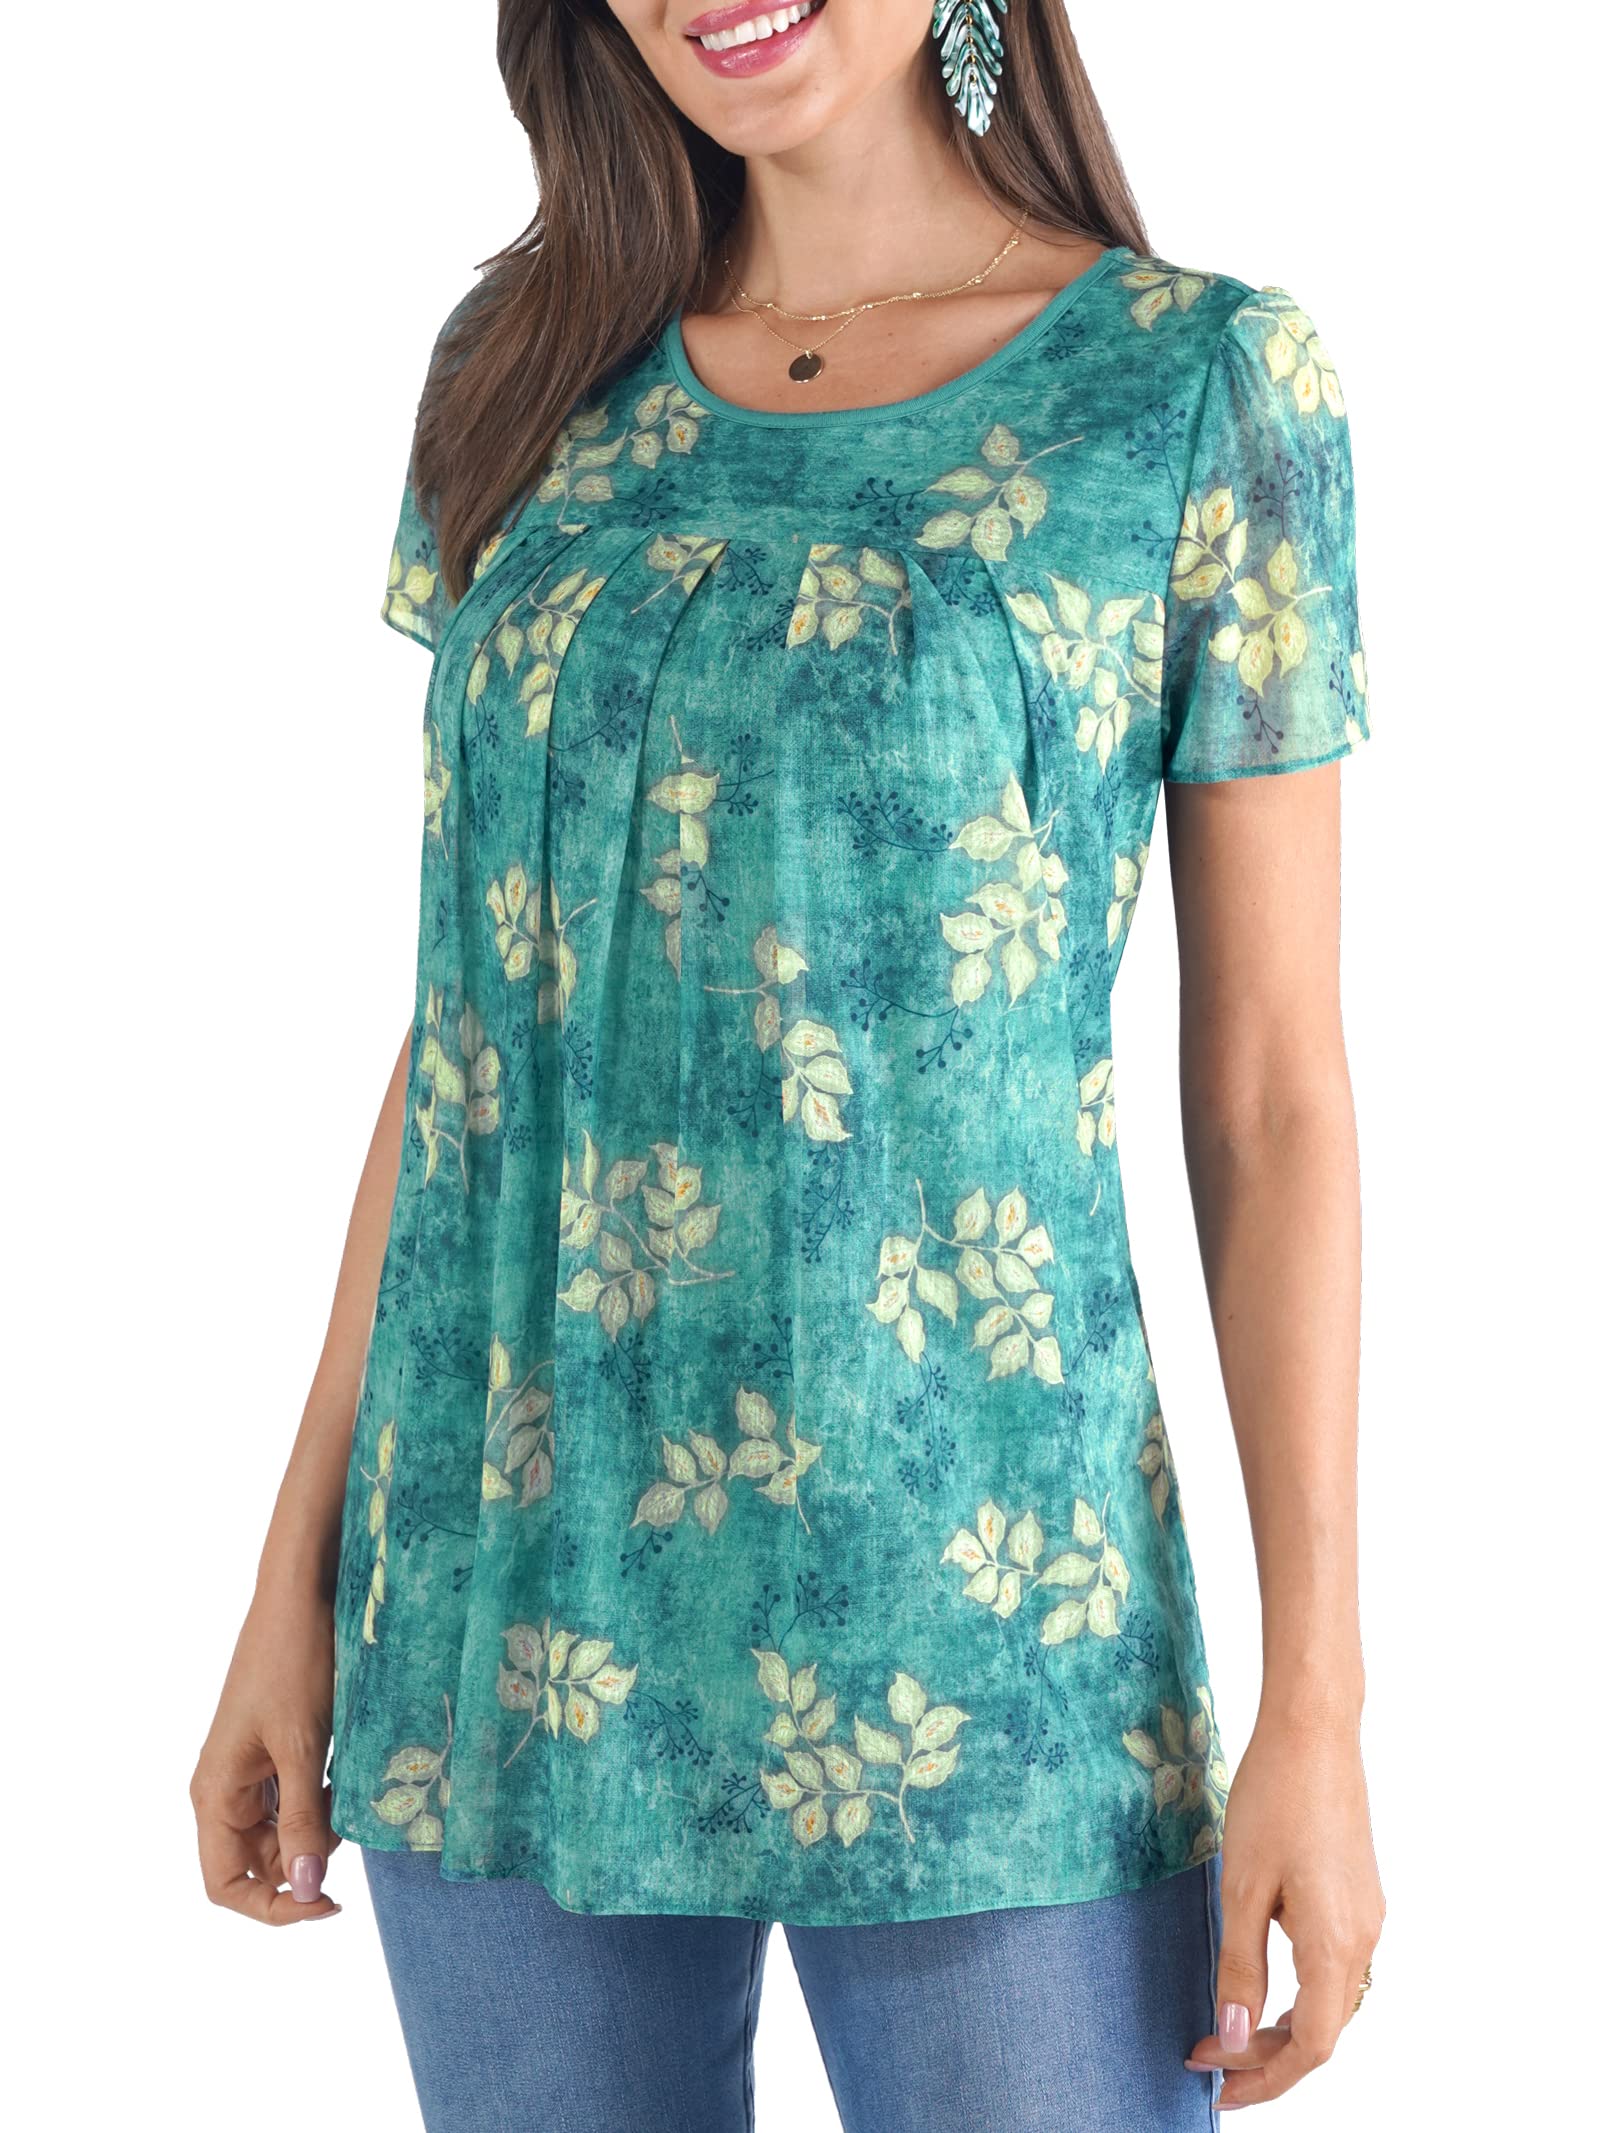 BAISHENGGT Teal Floral Womens Summer Casual Tunics Tops Floral Pleated Front Short Sleeve Flowy Mesh Layers Shirts Blouses